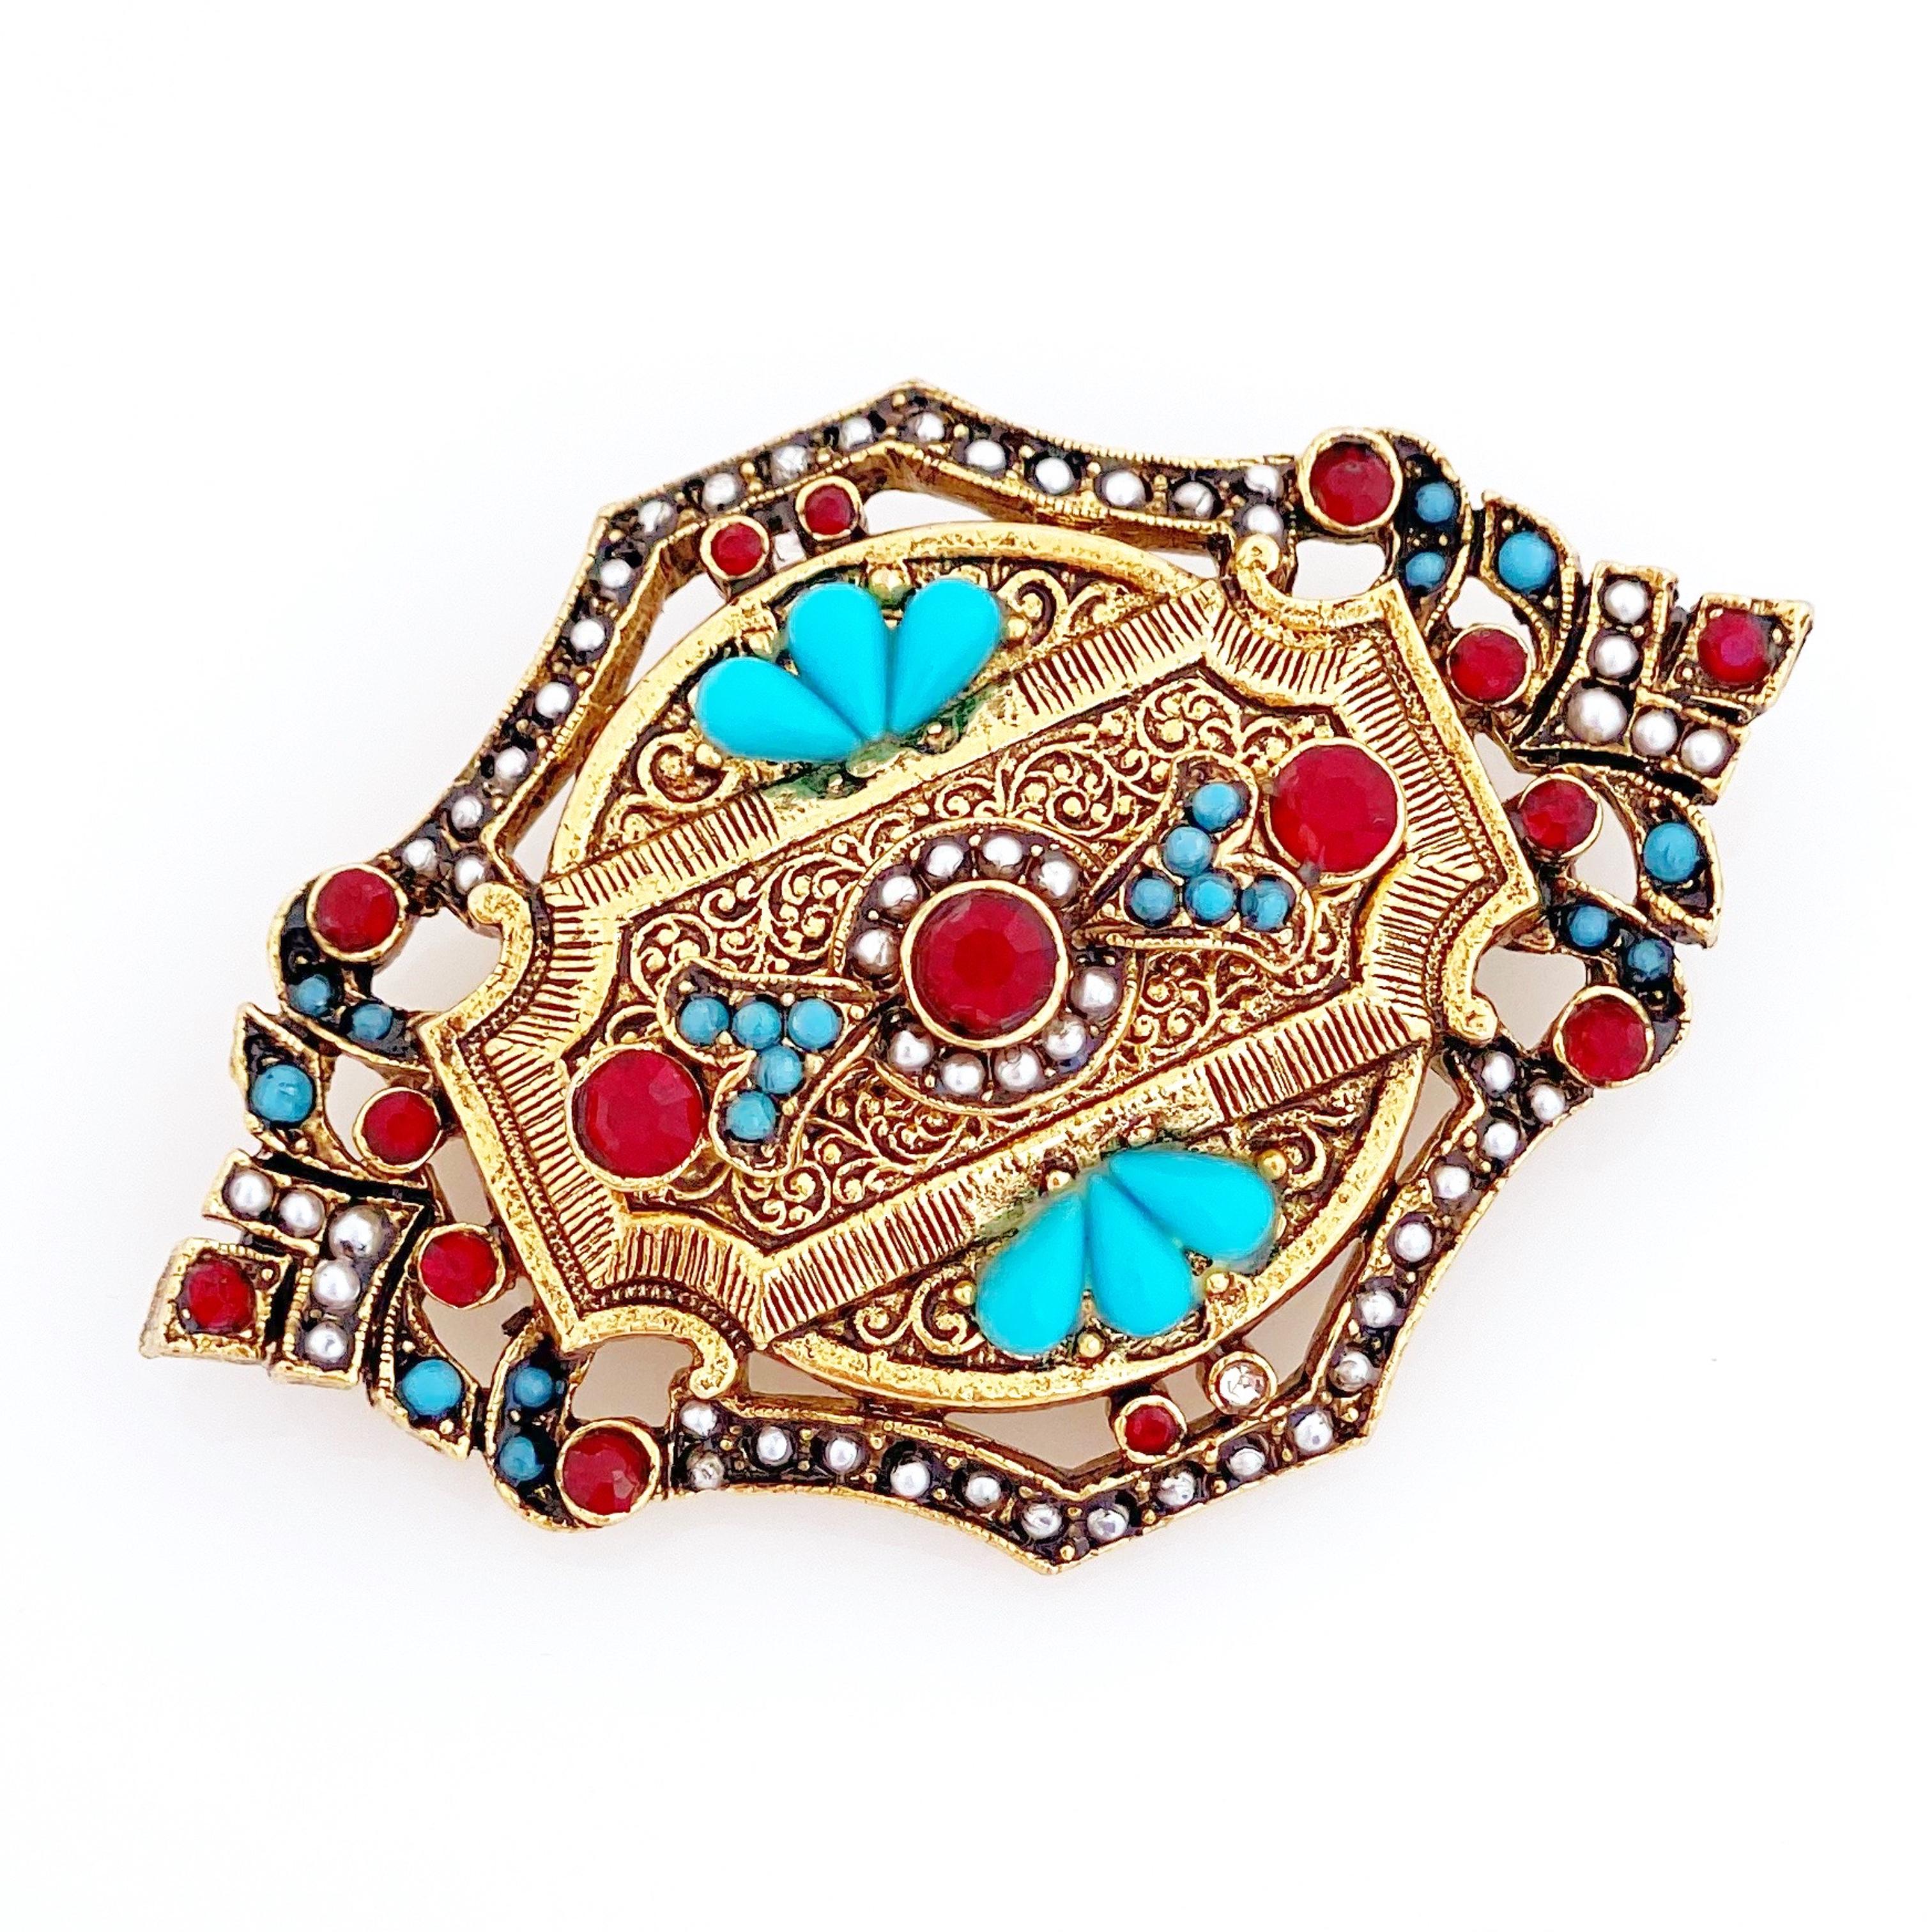 Modern Victorian Revival Ornate Brooch With Ruby Crystals & Turquoise By ModeArt, 1960s